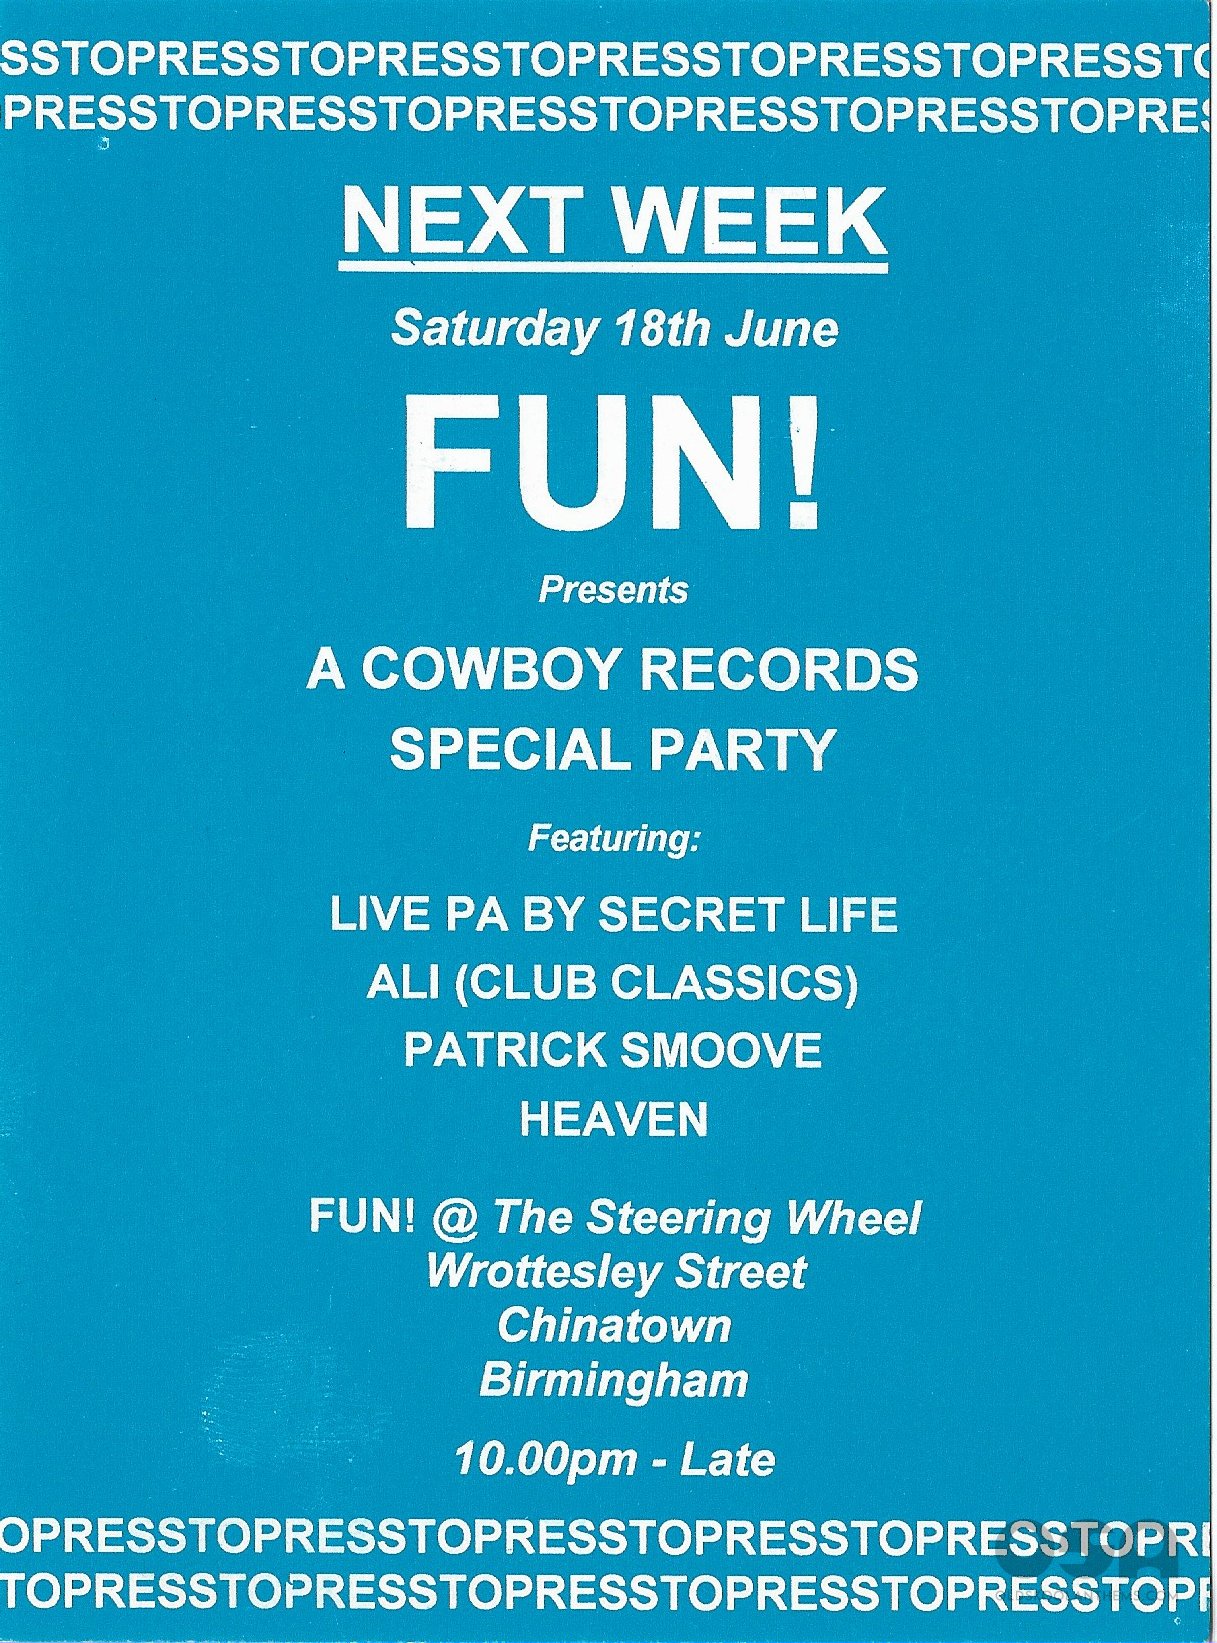 Fun @ The Steering Wheel - Cowboy Records Special Party - 18th June 1994 - (Single Sided Flyer) .jpg